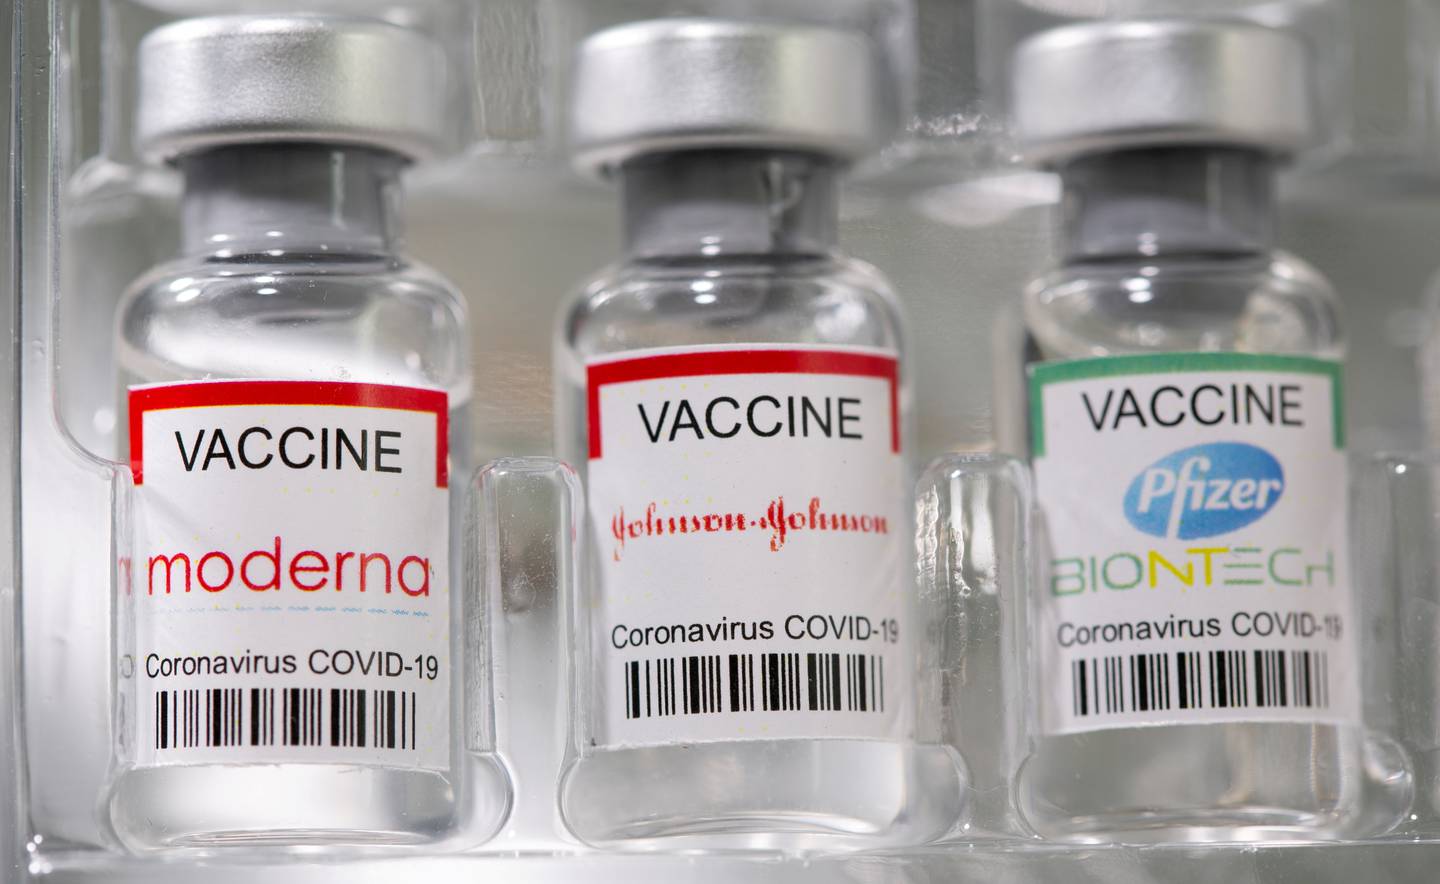 Johnson & Johnson reportedly expects to sell $2.5 billion of its Covid-19 vaccine this year. Reuters